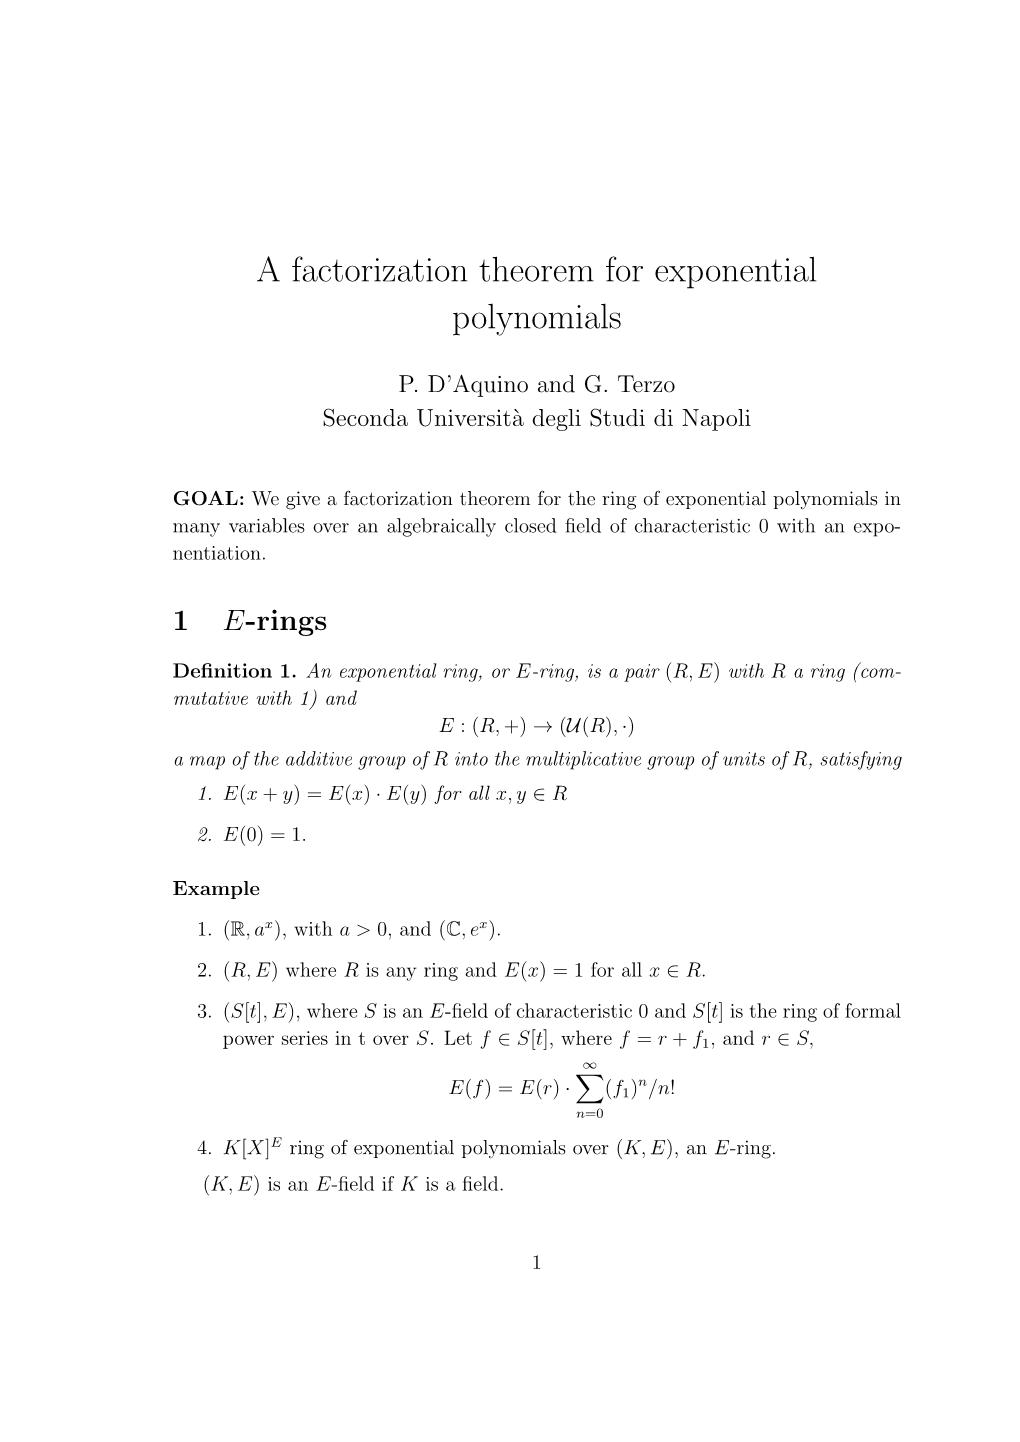 A Factorization Theorem for Exponential Polynomials